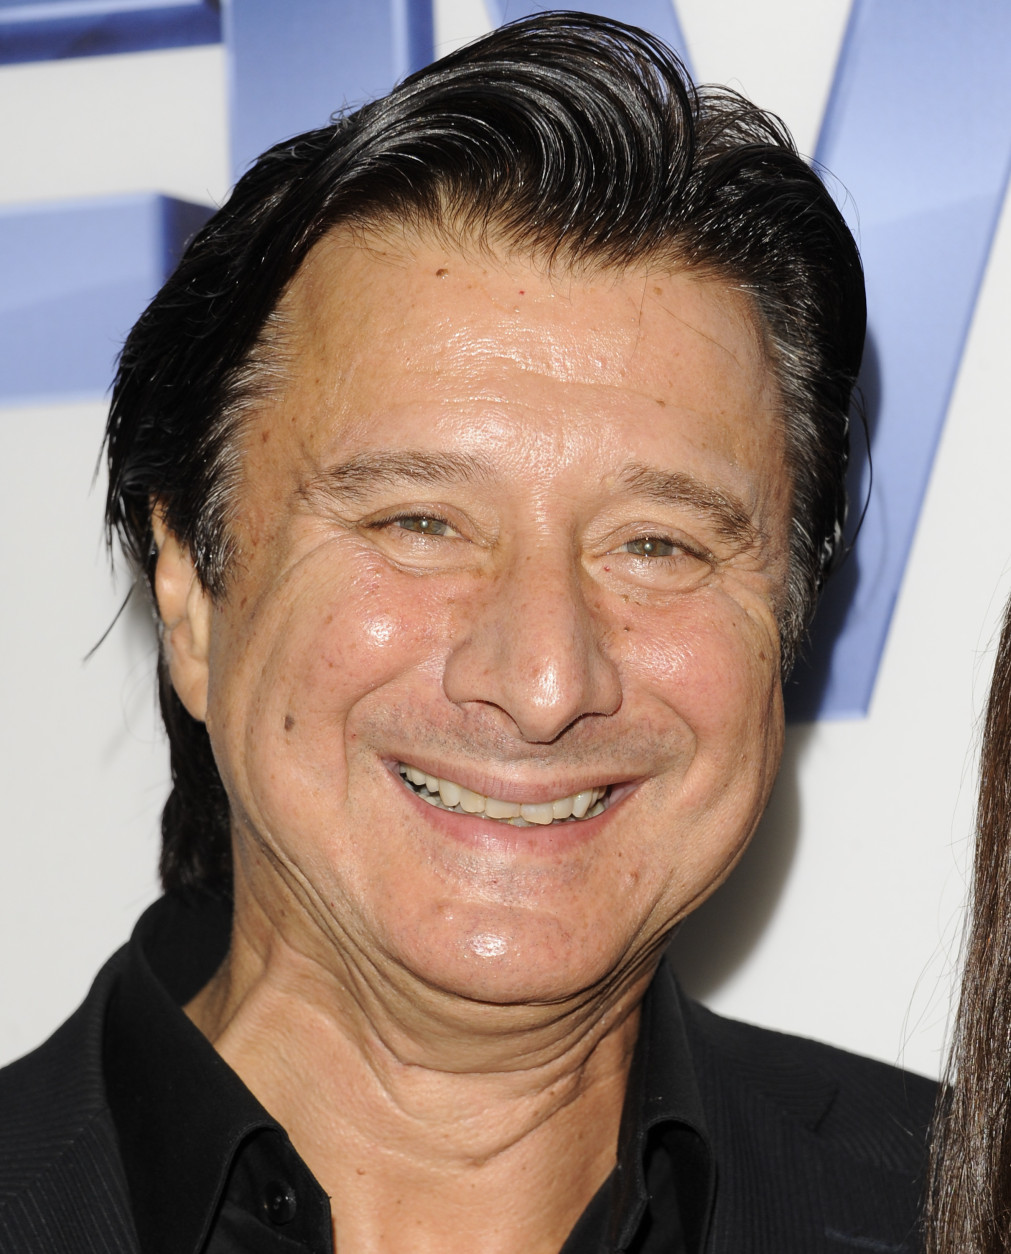 FILE - In this Sept. 26, 2011 file photo, Steve Perry, former lead singer of the rock band Journey, arrives at  a premiere screening at Skylight SoHo in New York. Perry said though the band's songs -- including the soundtrack staple "Don't Stop Believin'" have experienced a resurgence in recent years, there's little chance of Perry rejoining the band and participating in what likely would be a lucrative tour.  (AP Photo/Evan Agostini, file)